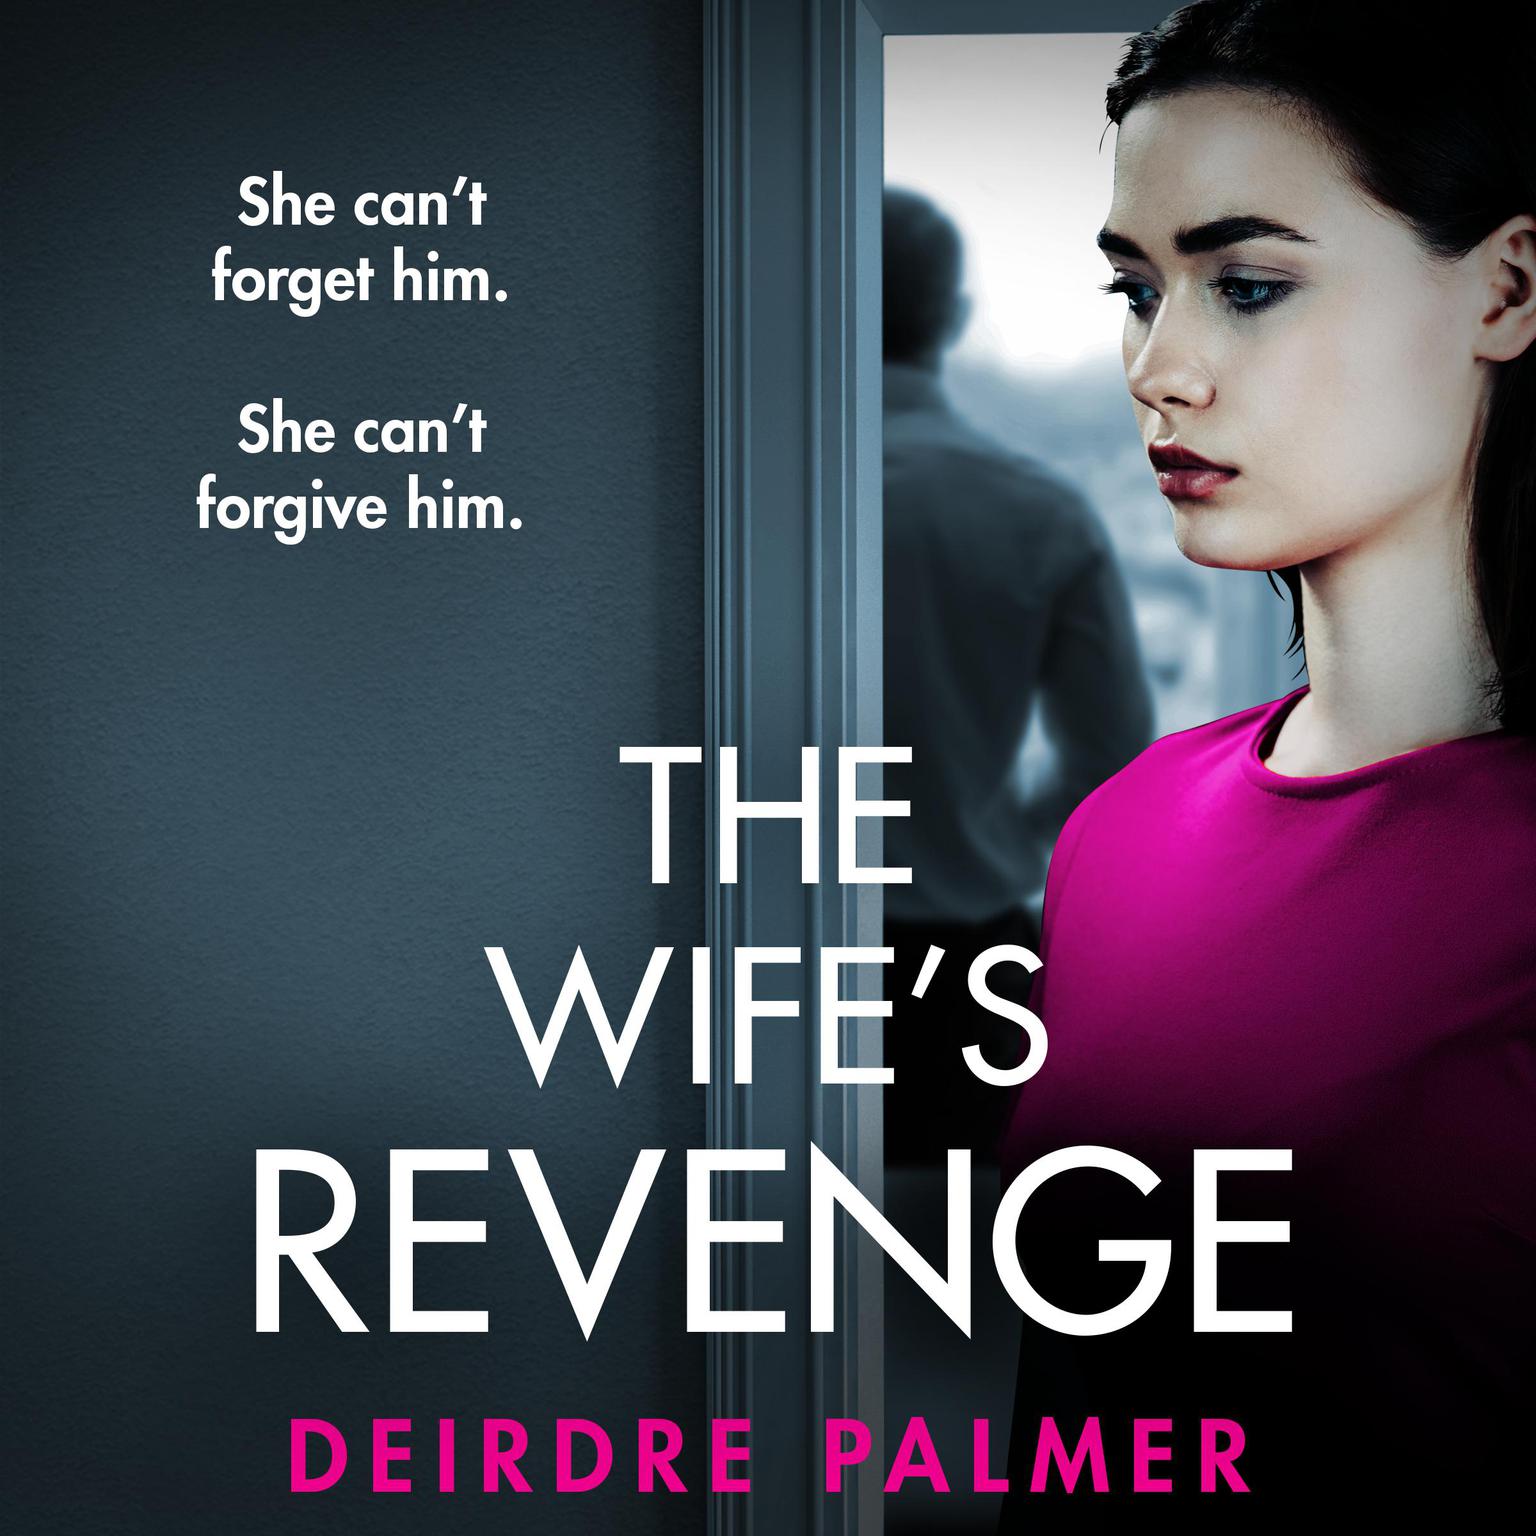 The Wifes Revenge: An unputdownable psychological thriller full of shocking twists Audiobook, by Deirdre Palmer